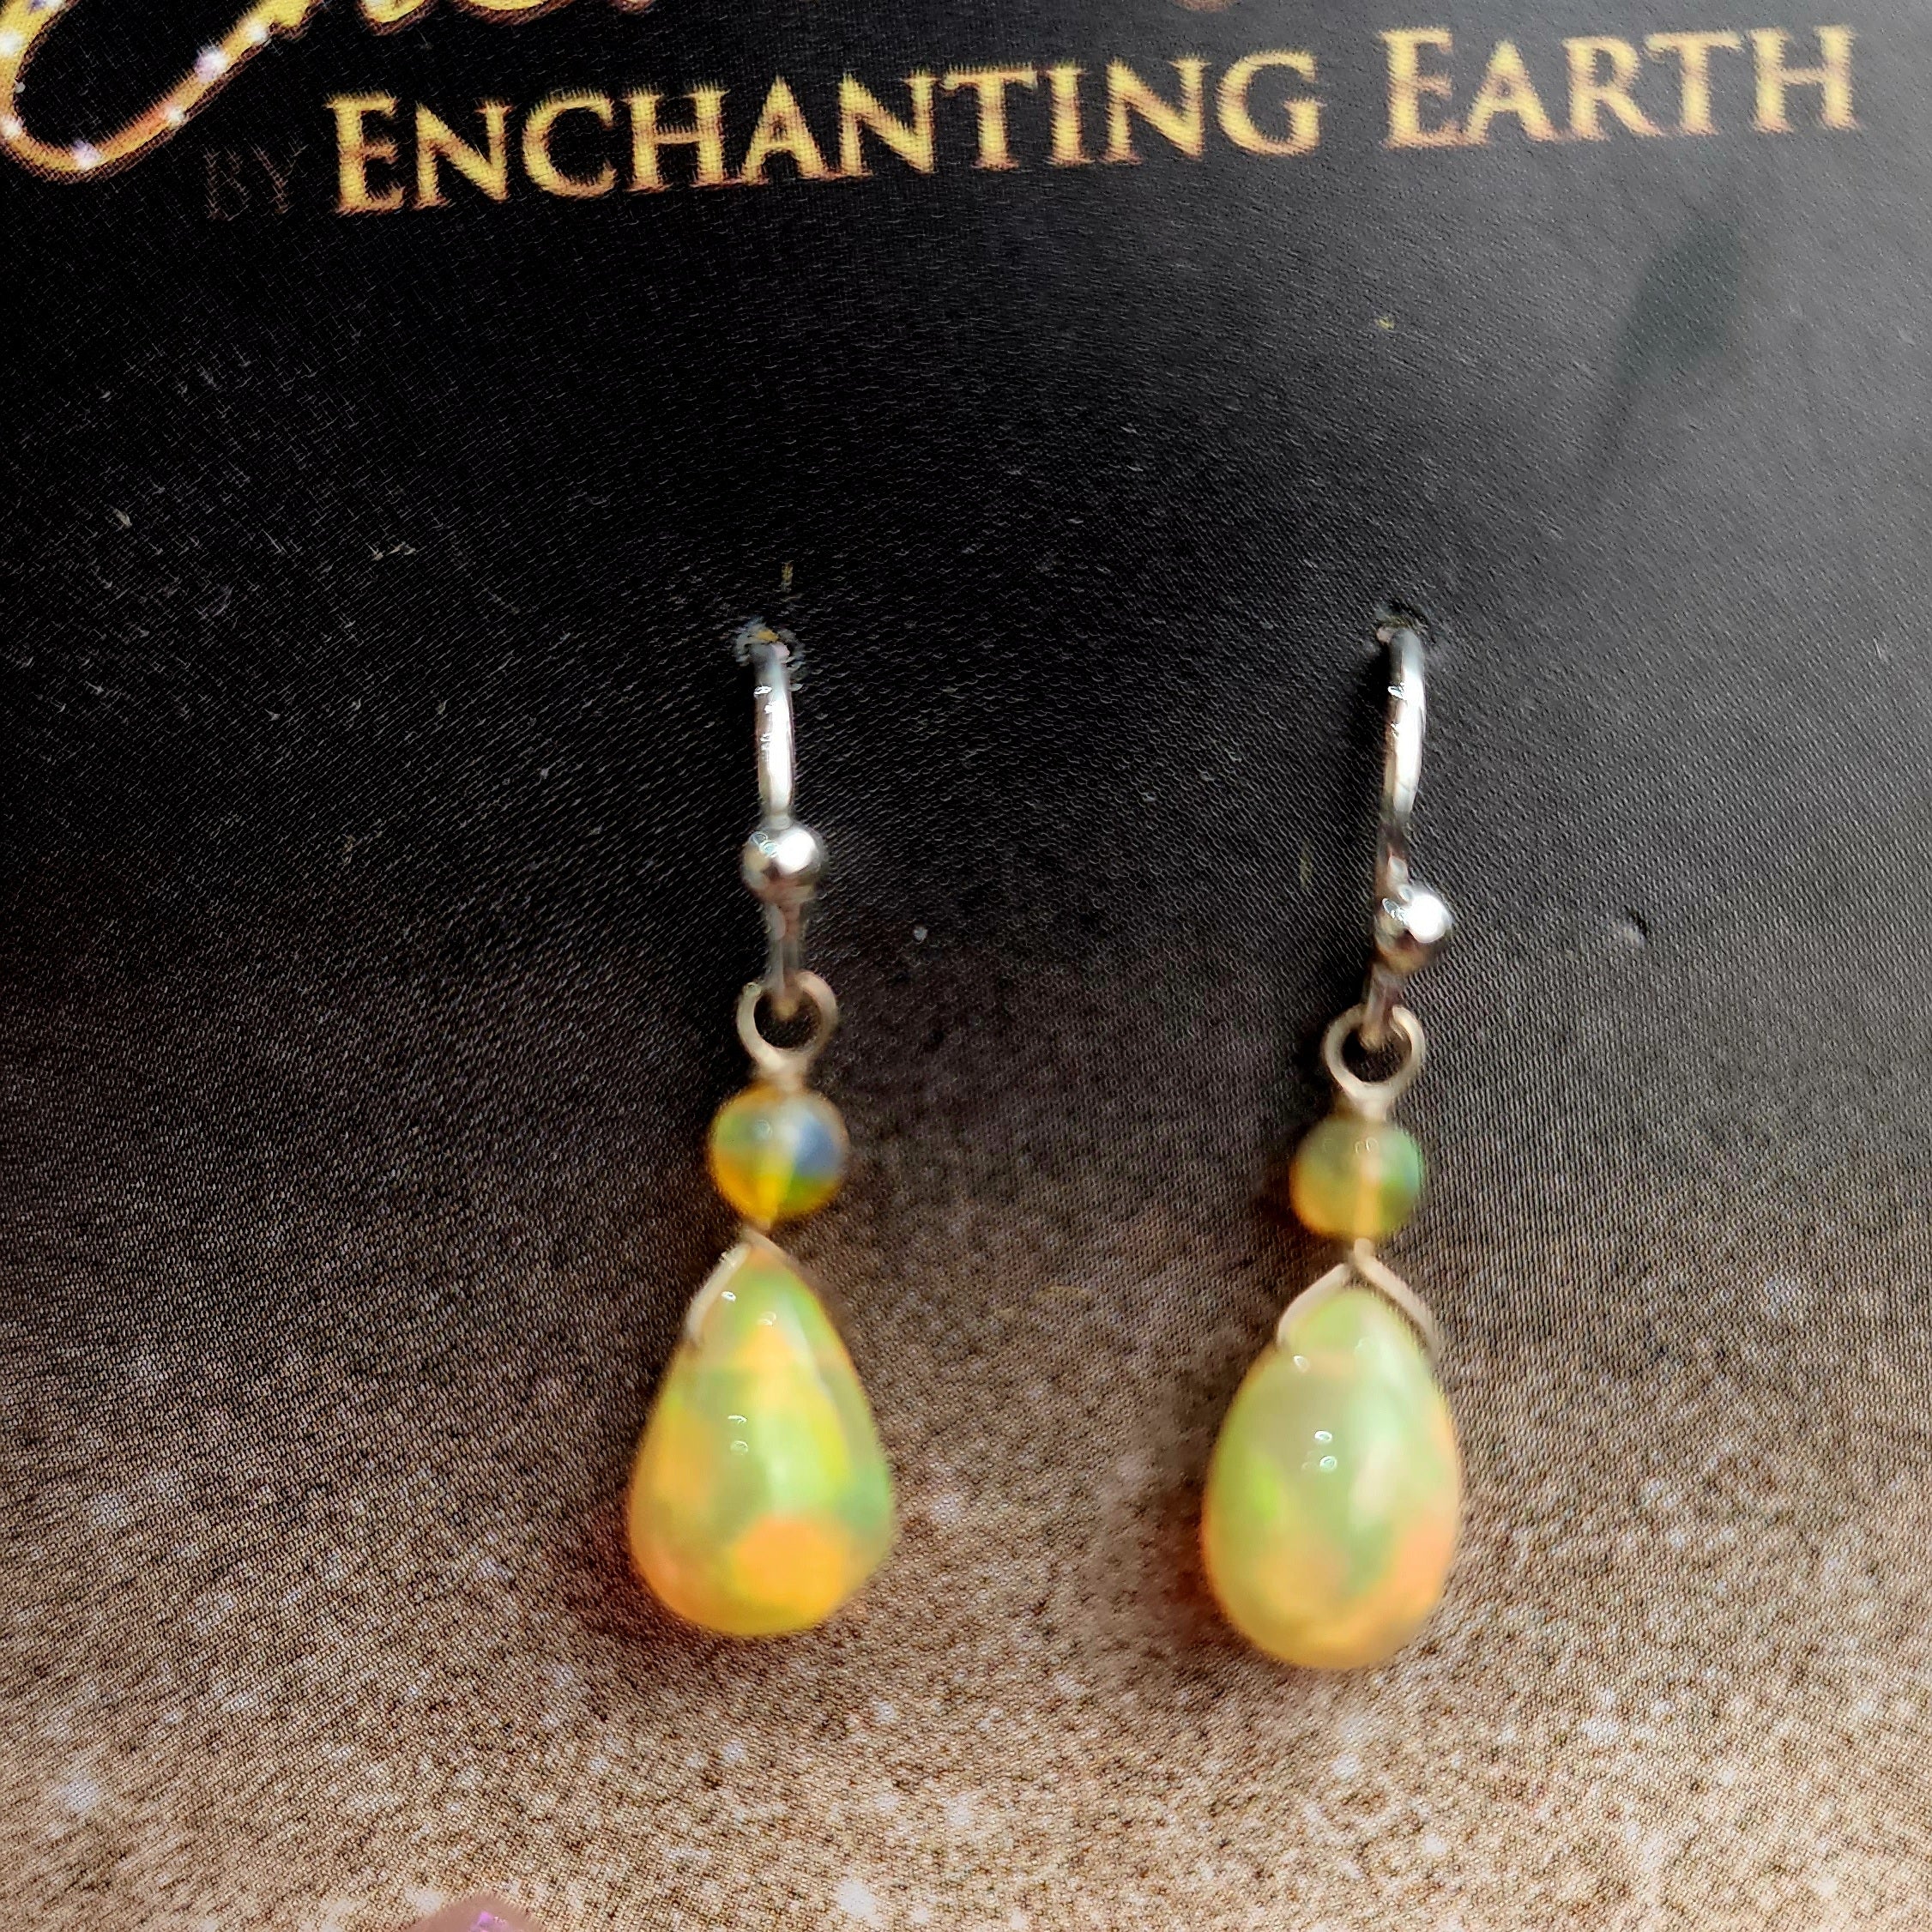 Ethiopian Opal .925 Silver Earrings for Creativity, Joy and Self Discovery